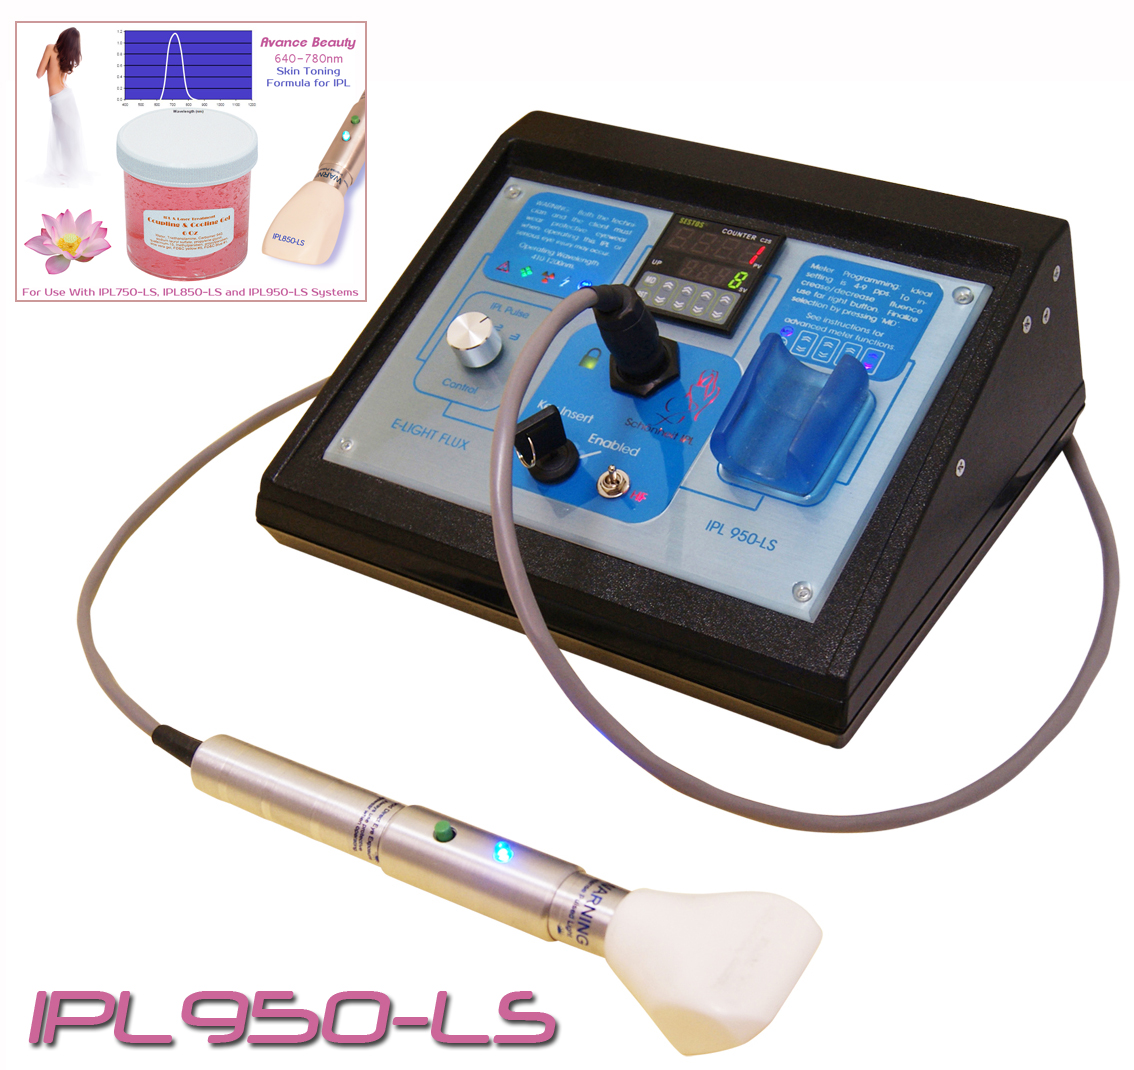 IPL950-LS Toning & Tightening Gel Kit 640-780nm with Beauty Treatment Machine, System, Device. 642057128568